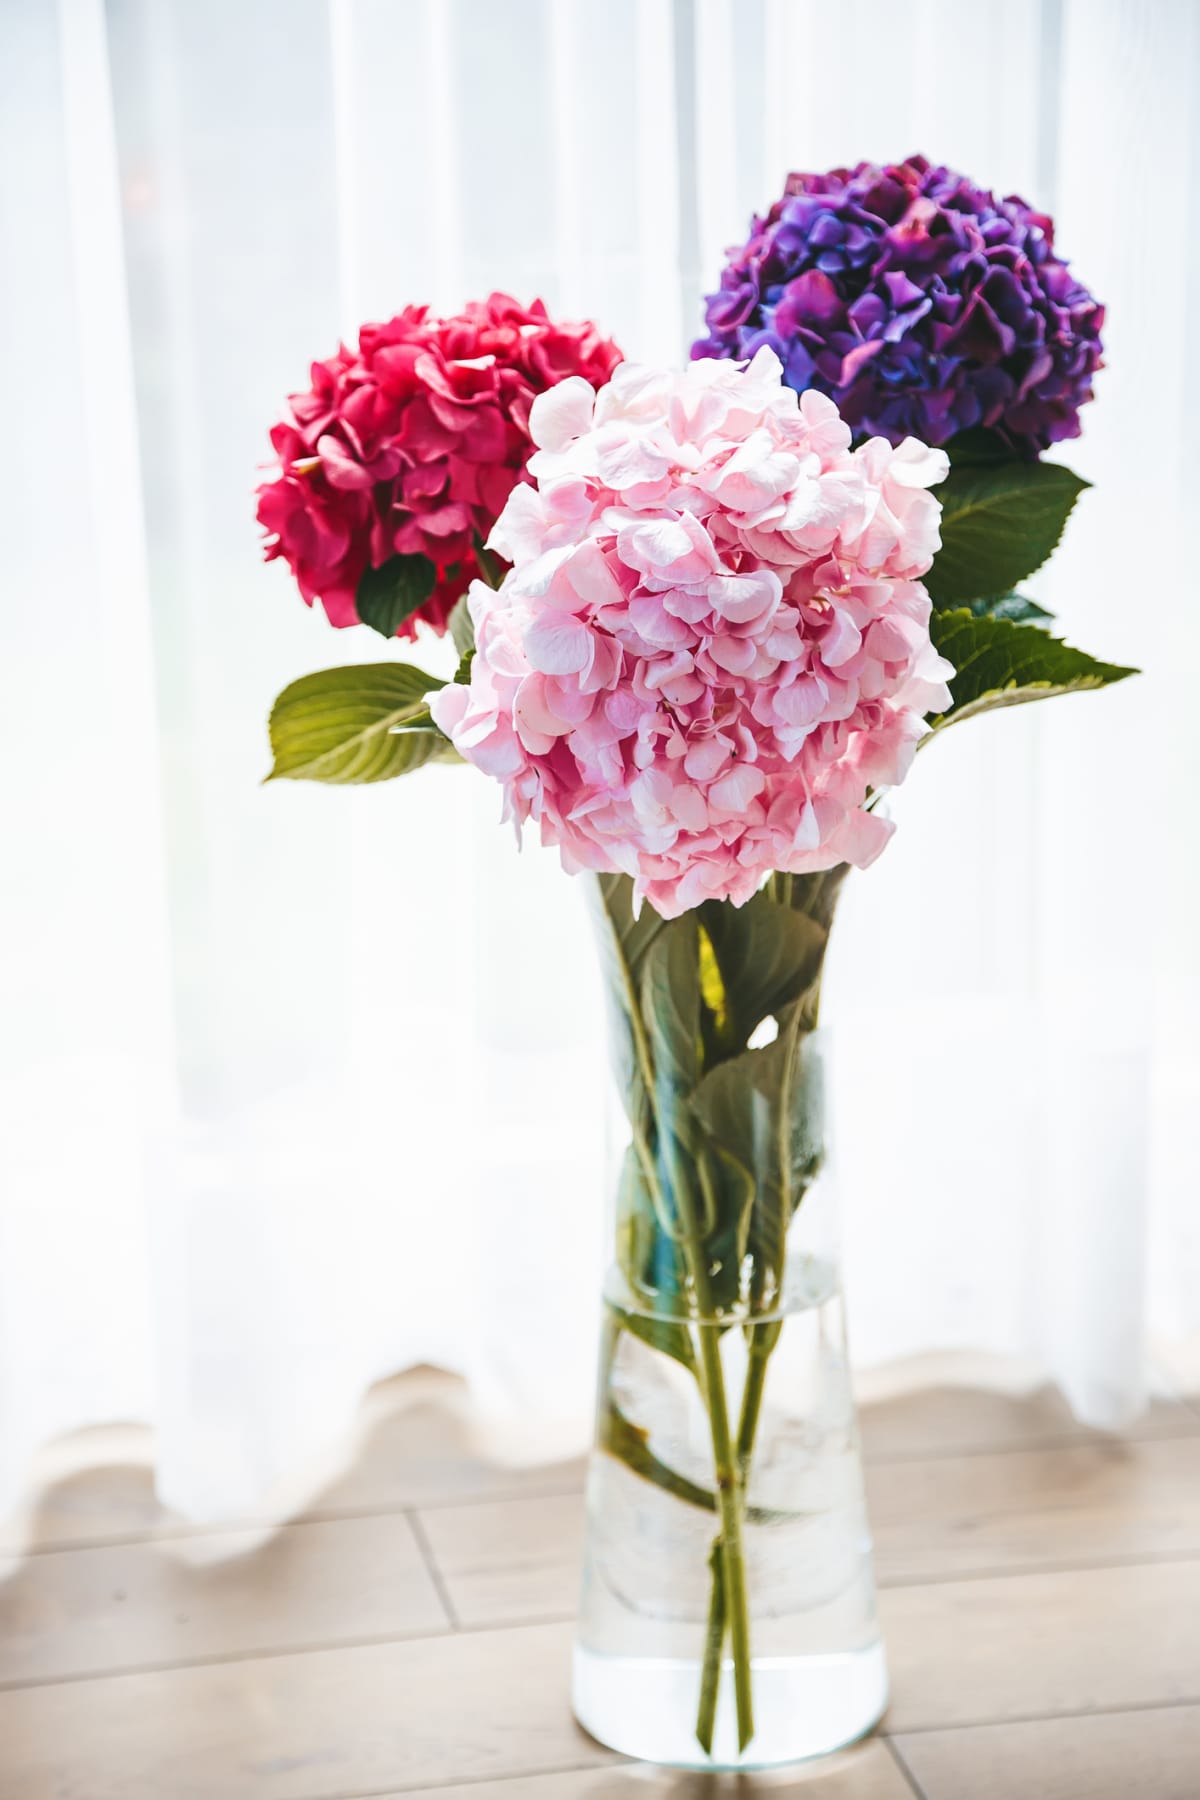 Bouquet of colorful blooming hydrangea flowers in a vase